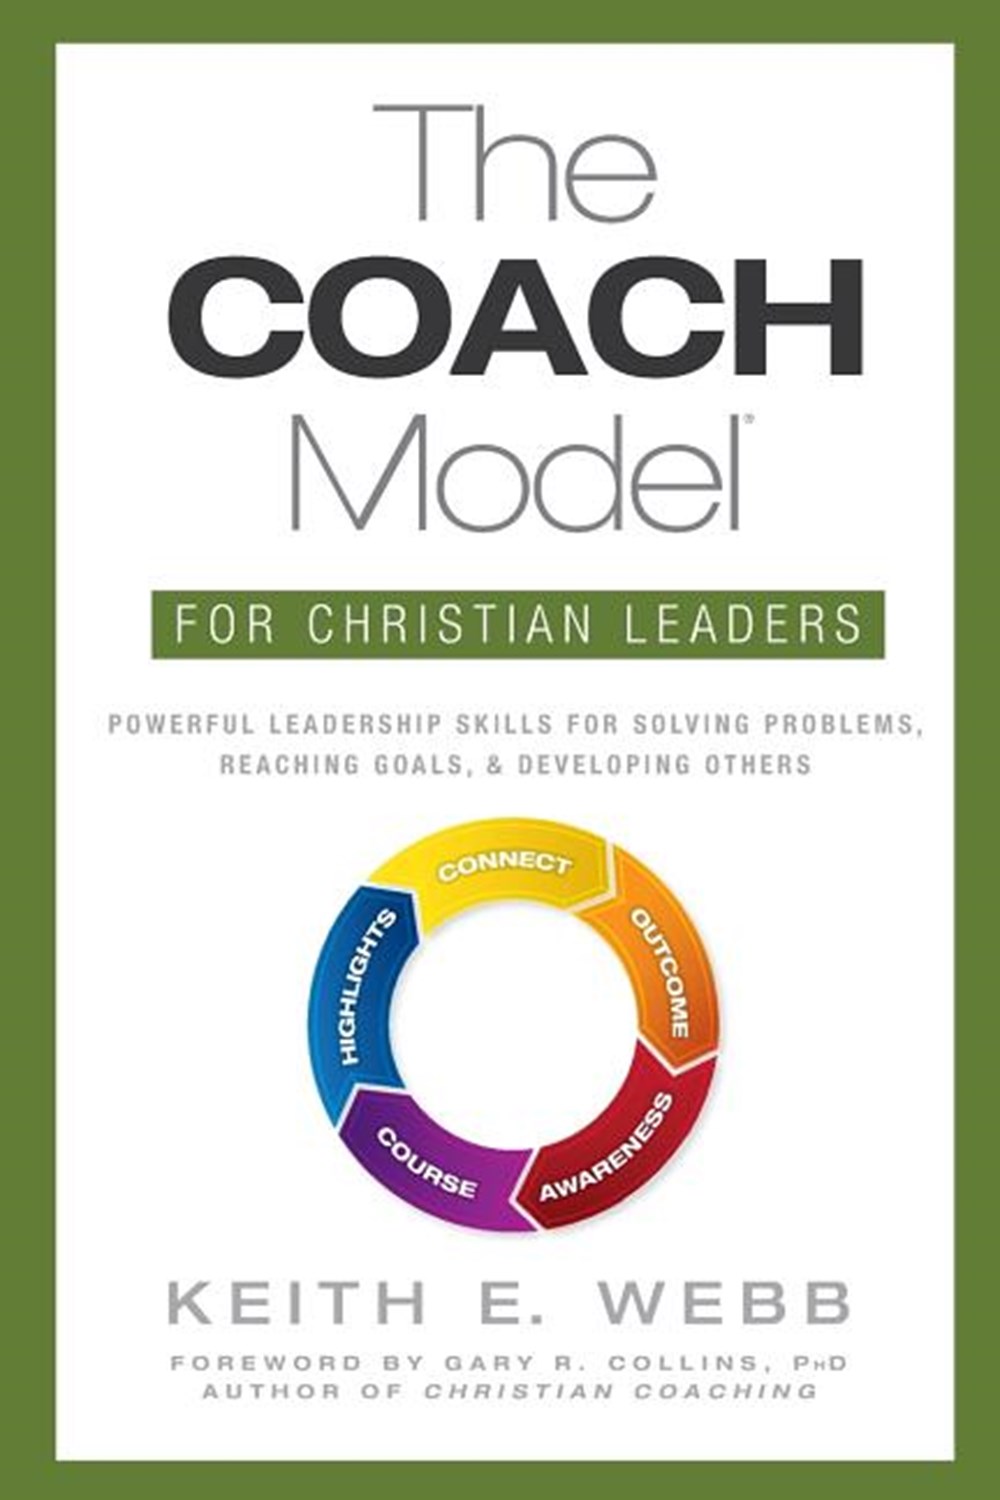 Coach Model for Christian Leaders: Powerful Leadership Skills for Solving Problems, Reaching Goals, 